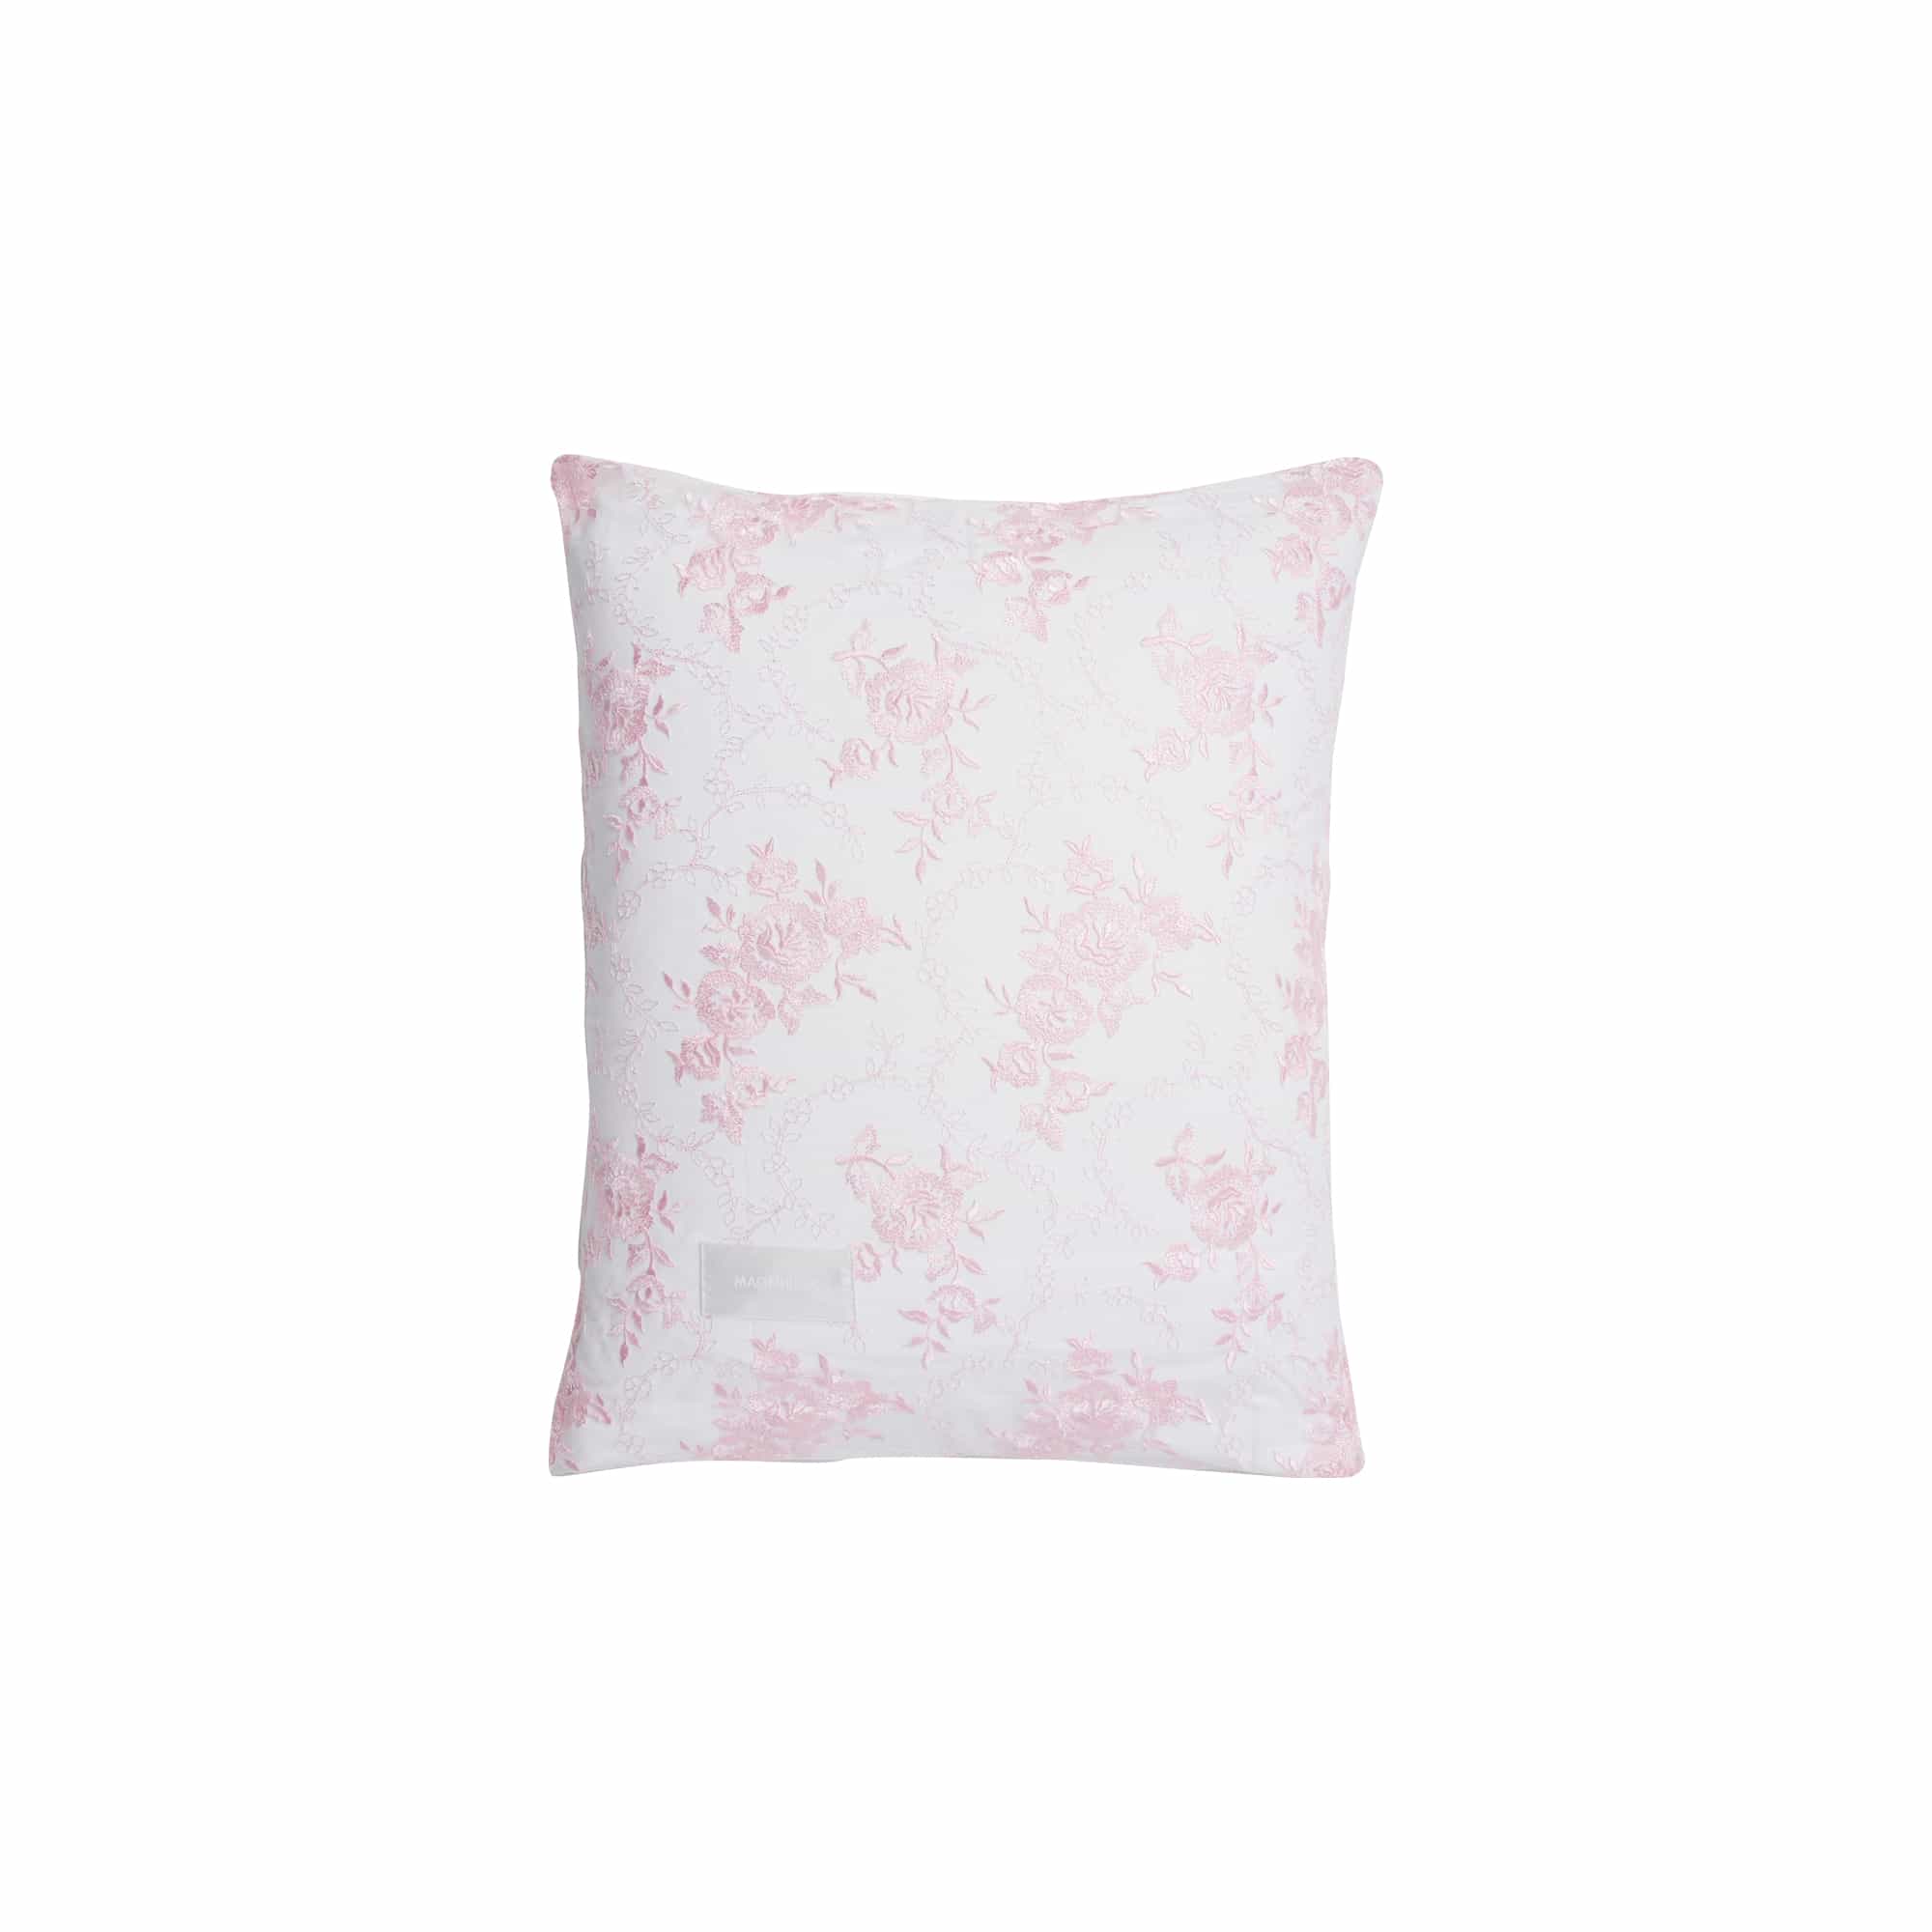 Rose Pillow Case Lace Pink